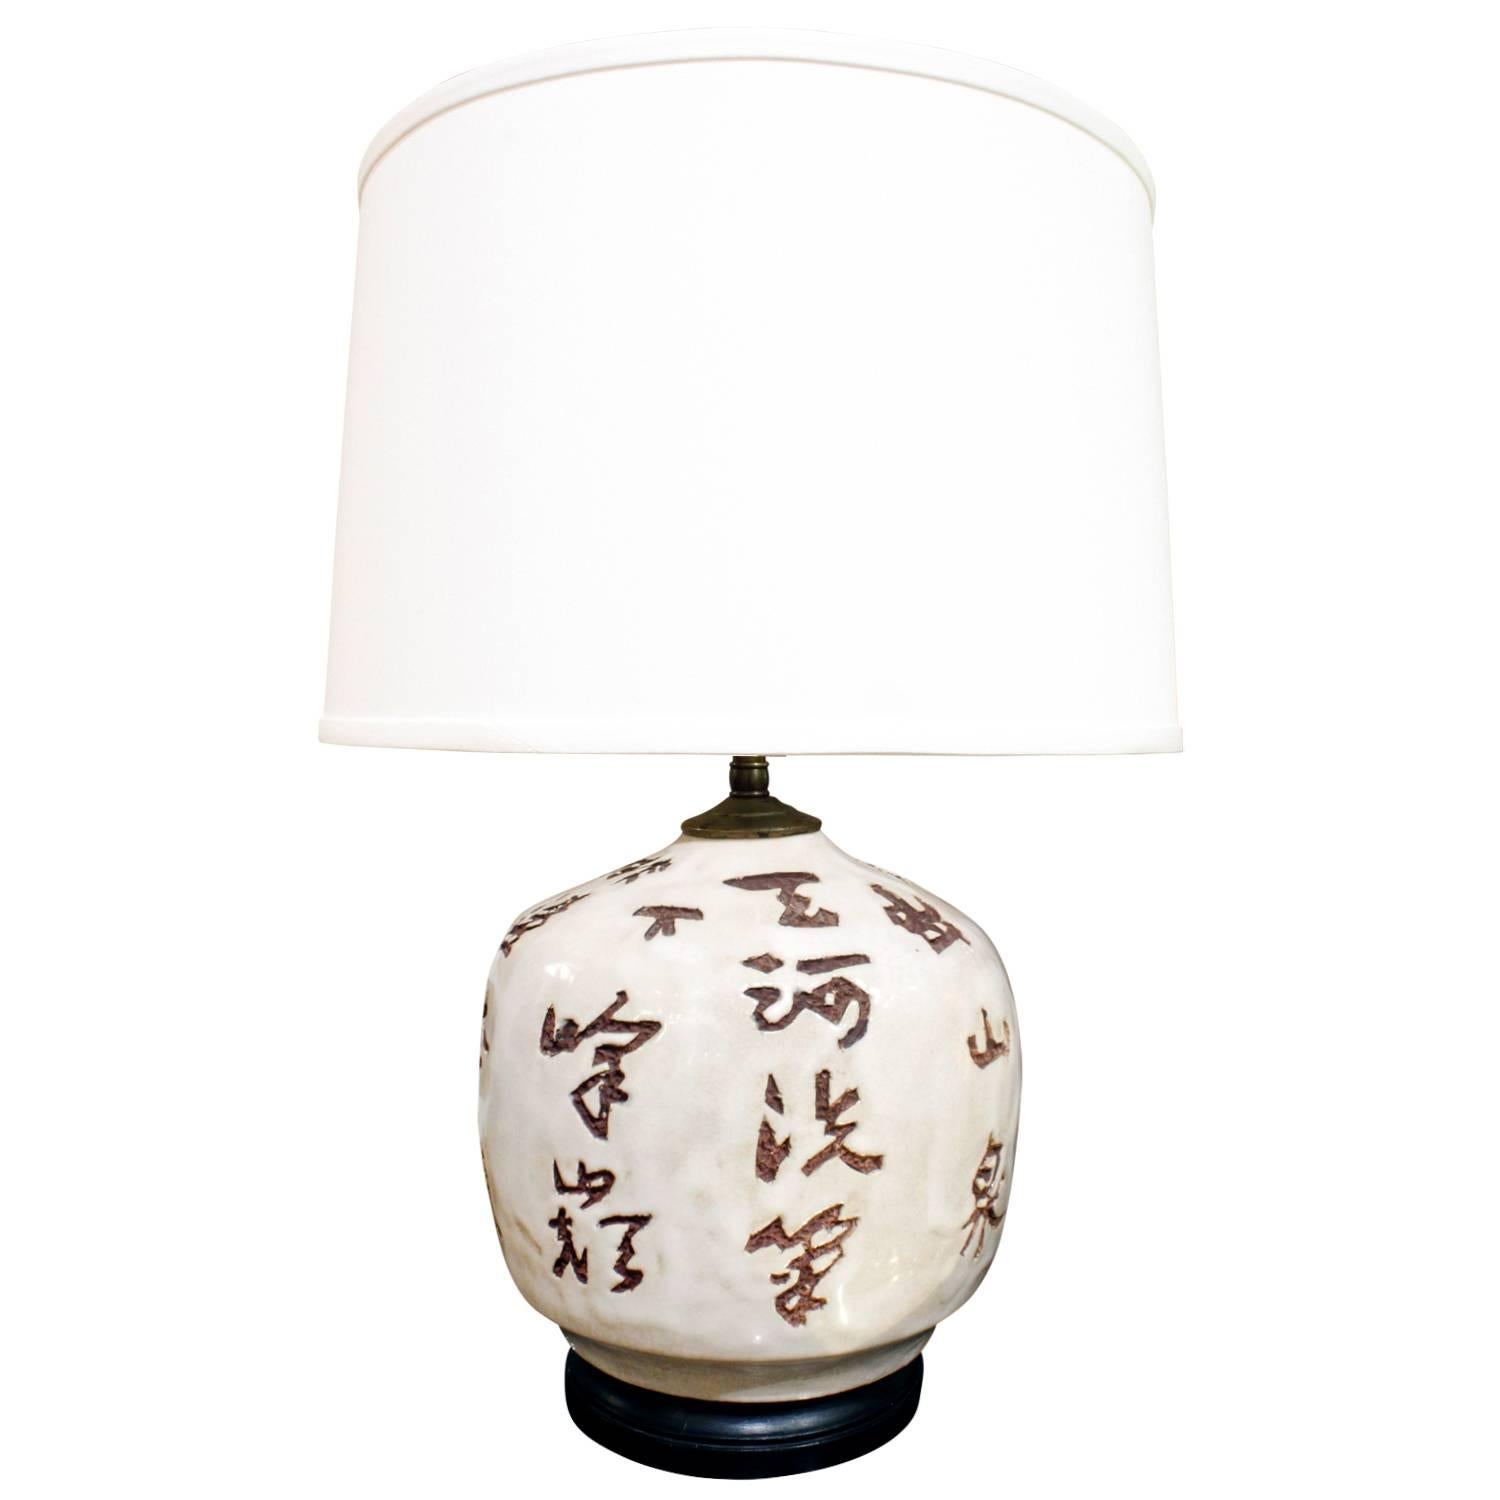 Mid-Century Modern Pair of Ceramic Lamps with Chinese Character Decoration, 1950s